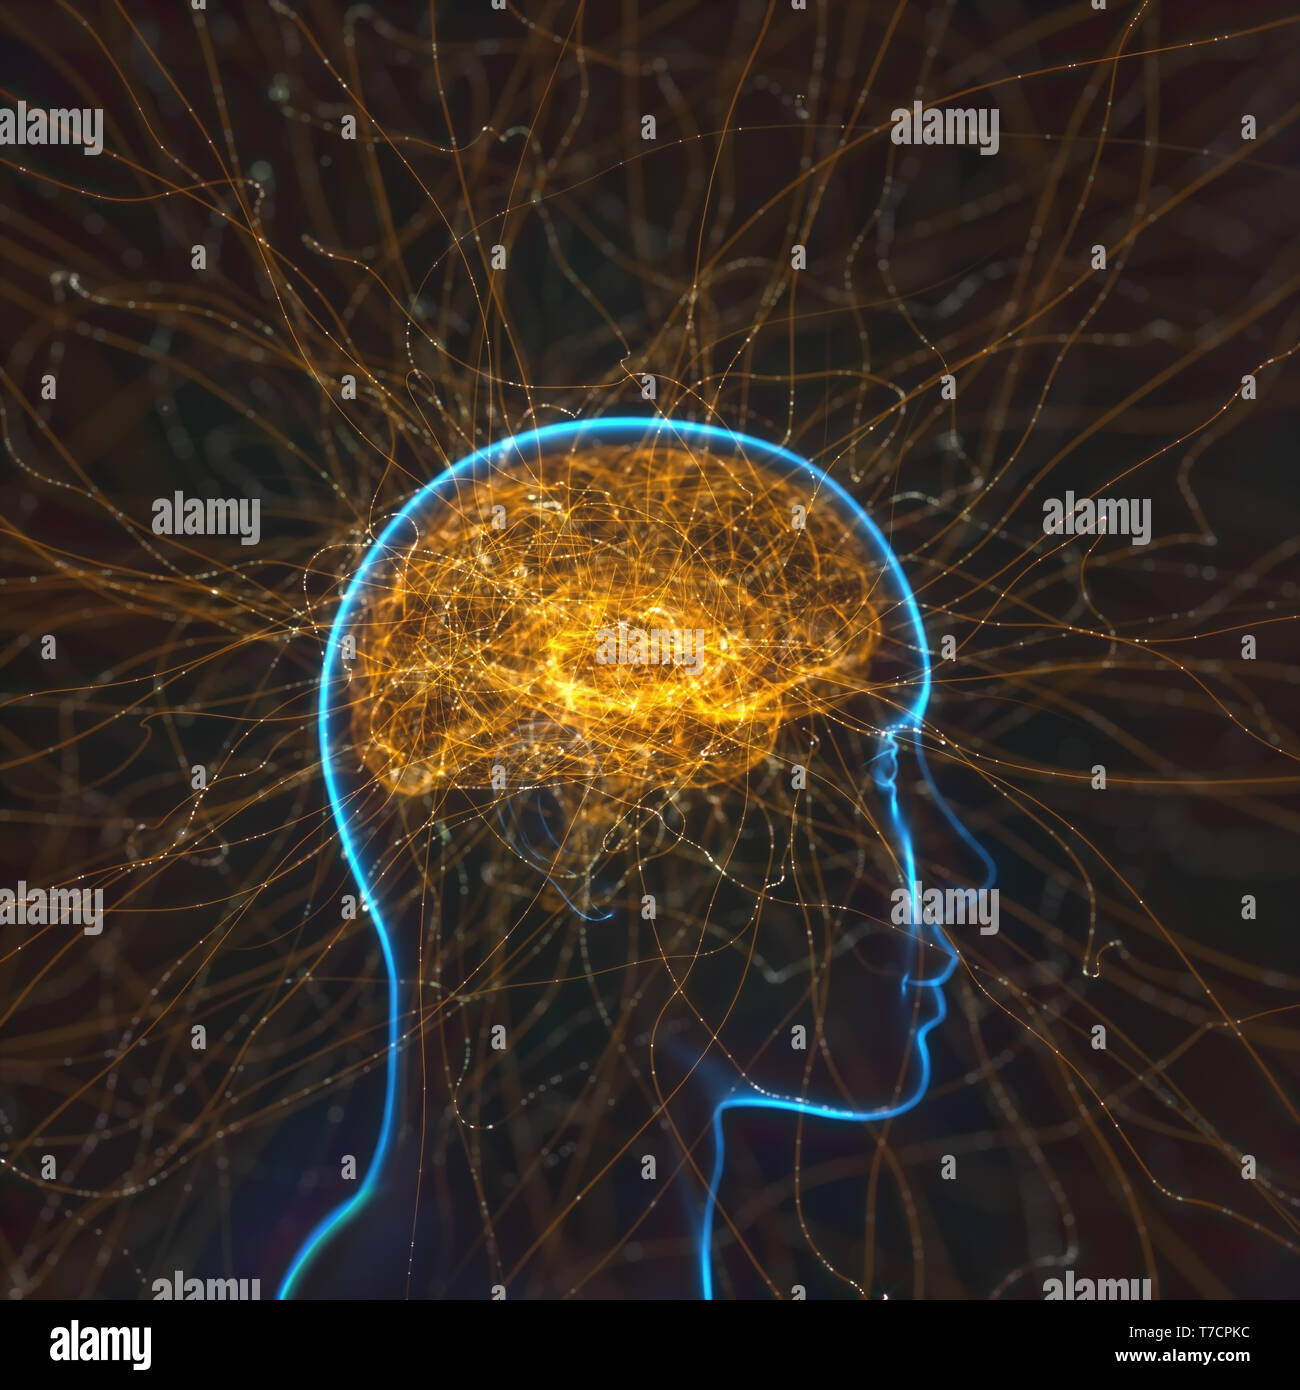 3D illustration. Human brain in concept of neural connections and electrical pulses. Stock Photo